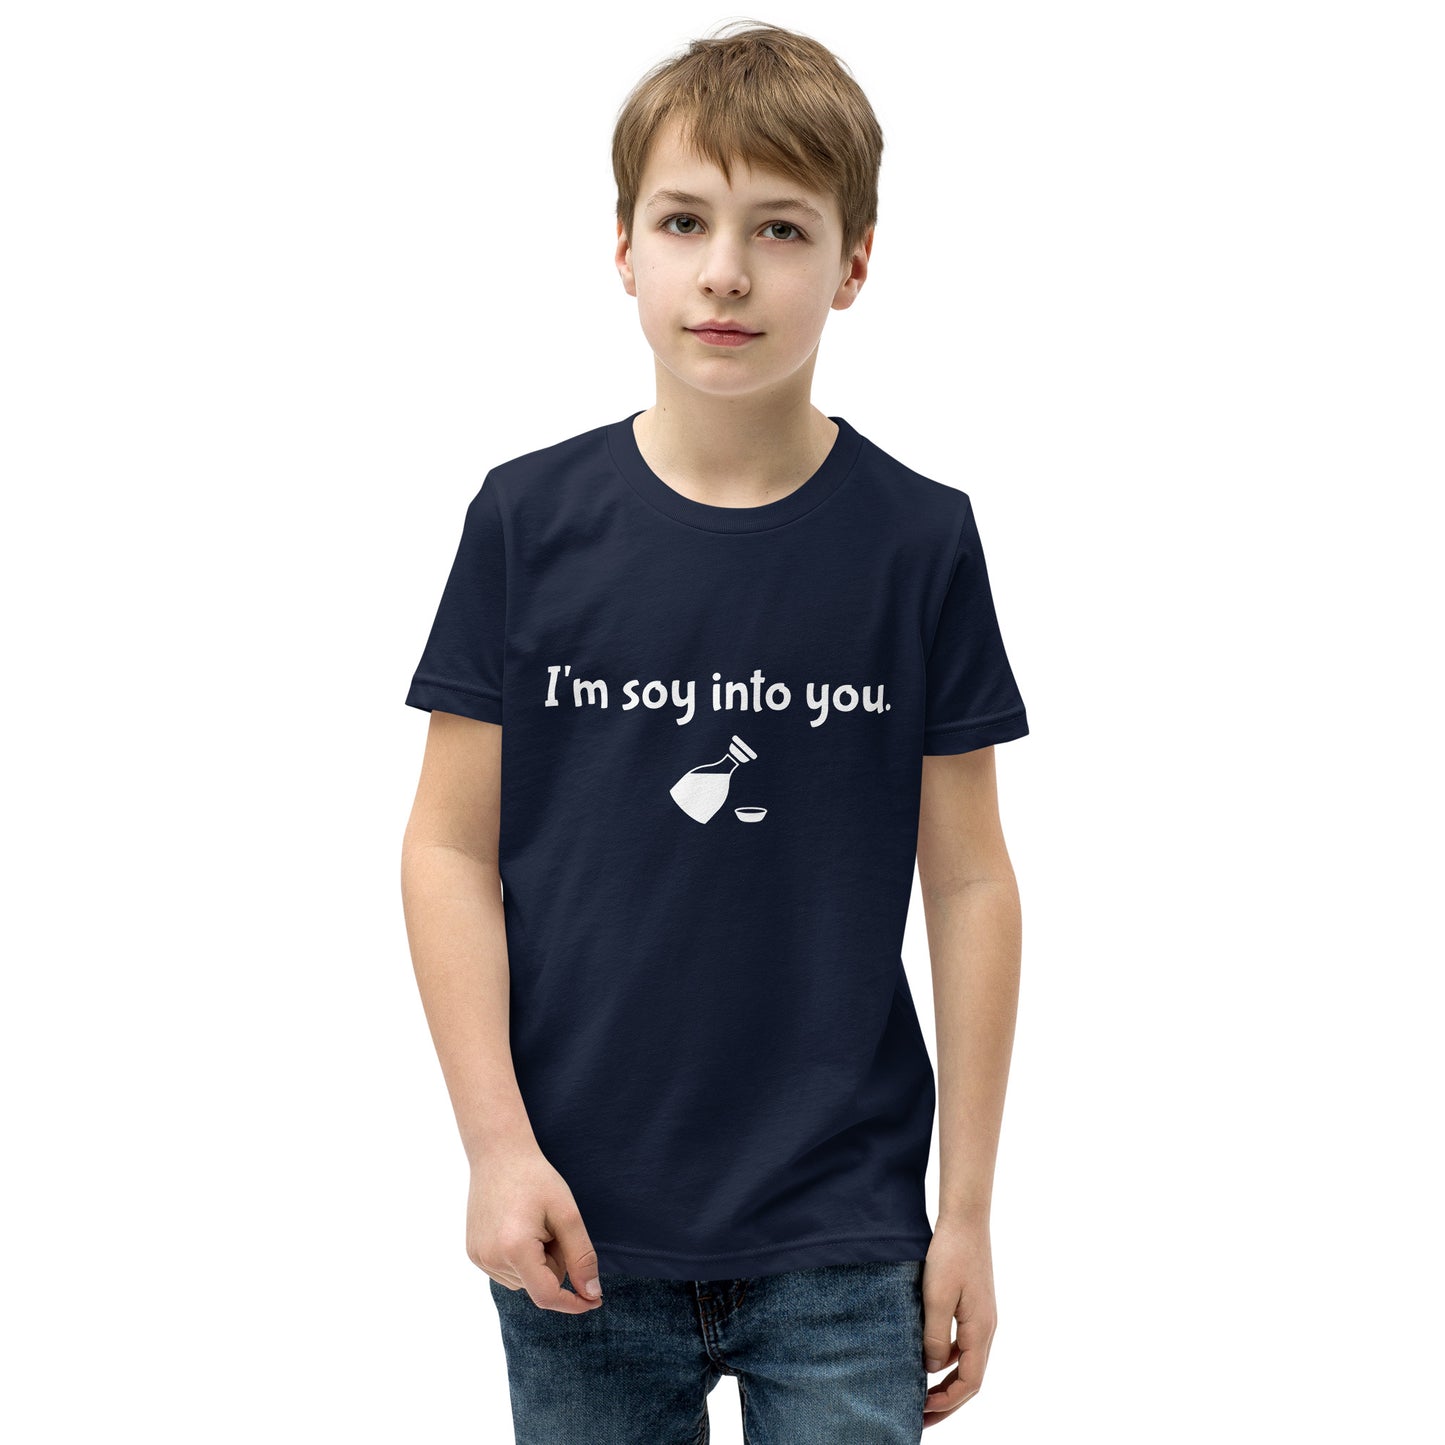 Youth Short Sleeve T-Shirt - I'm Soy Into You